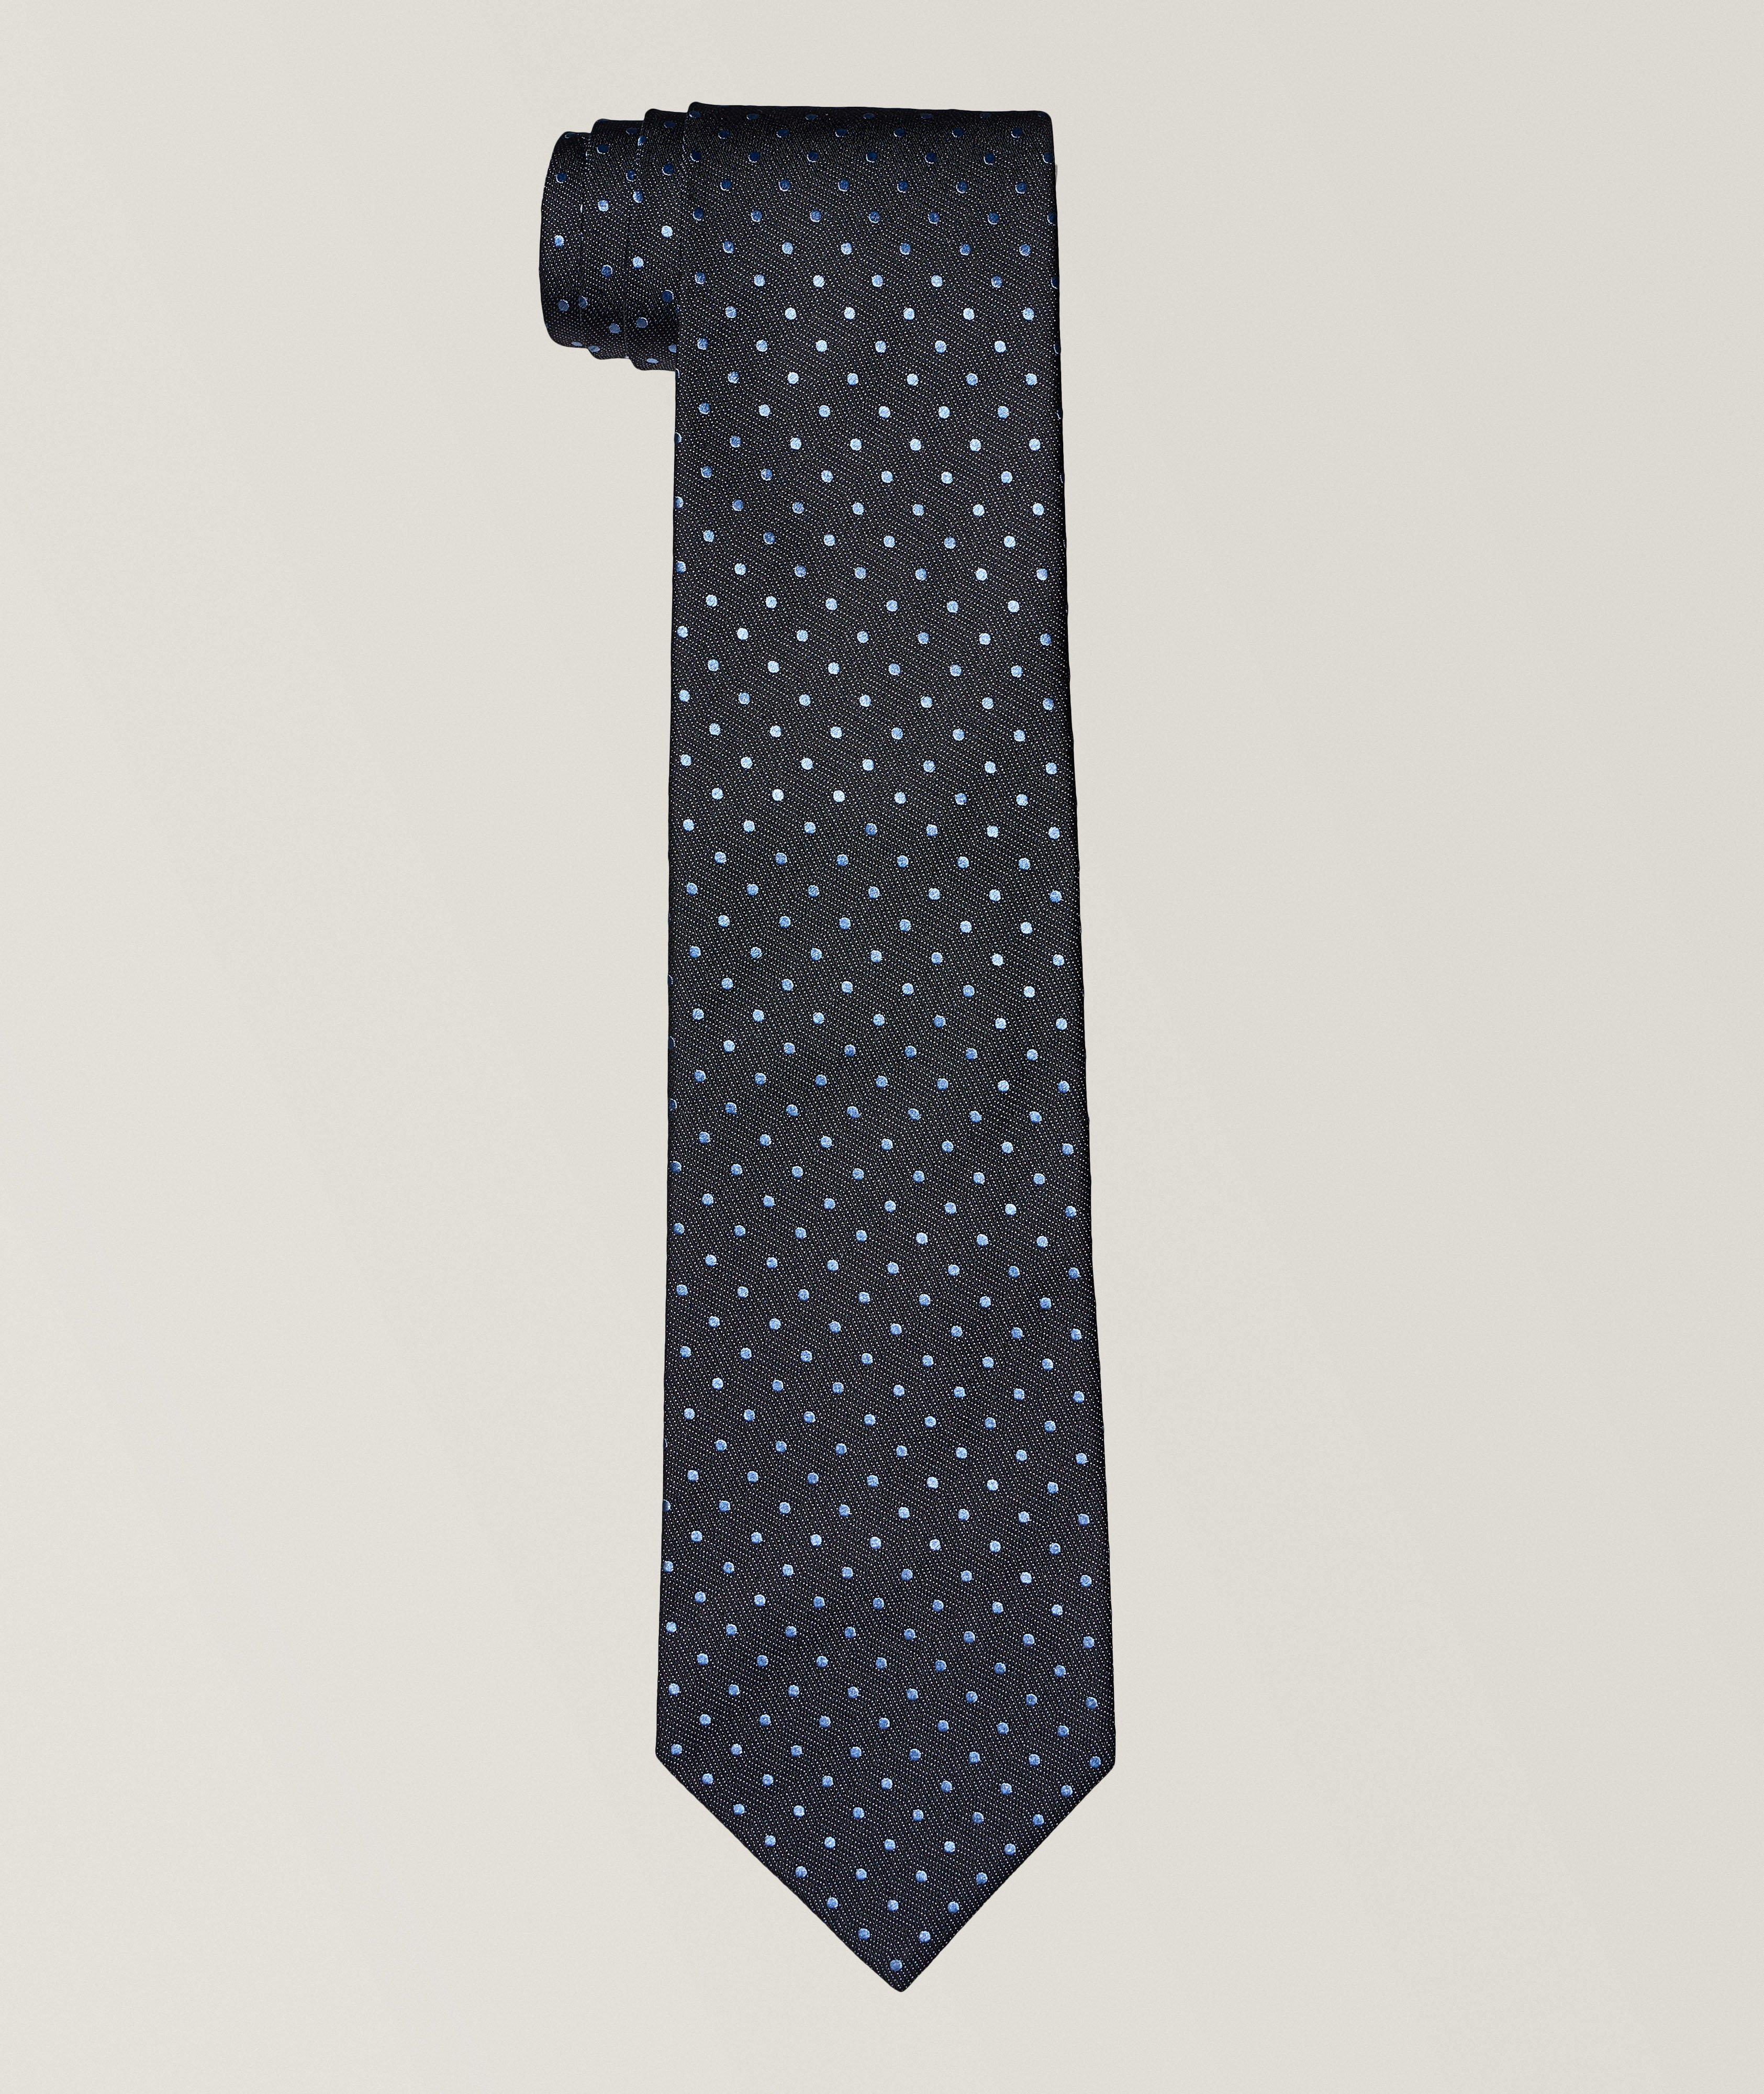 Dotted Silk Tie  image 0